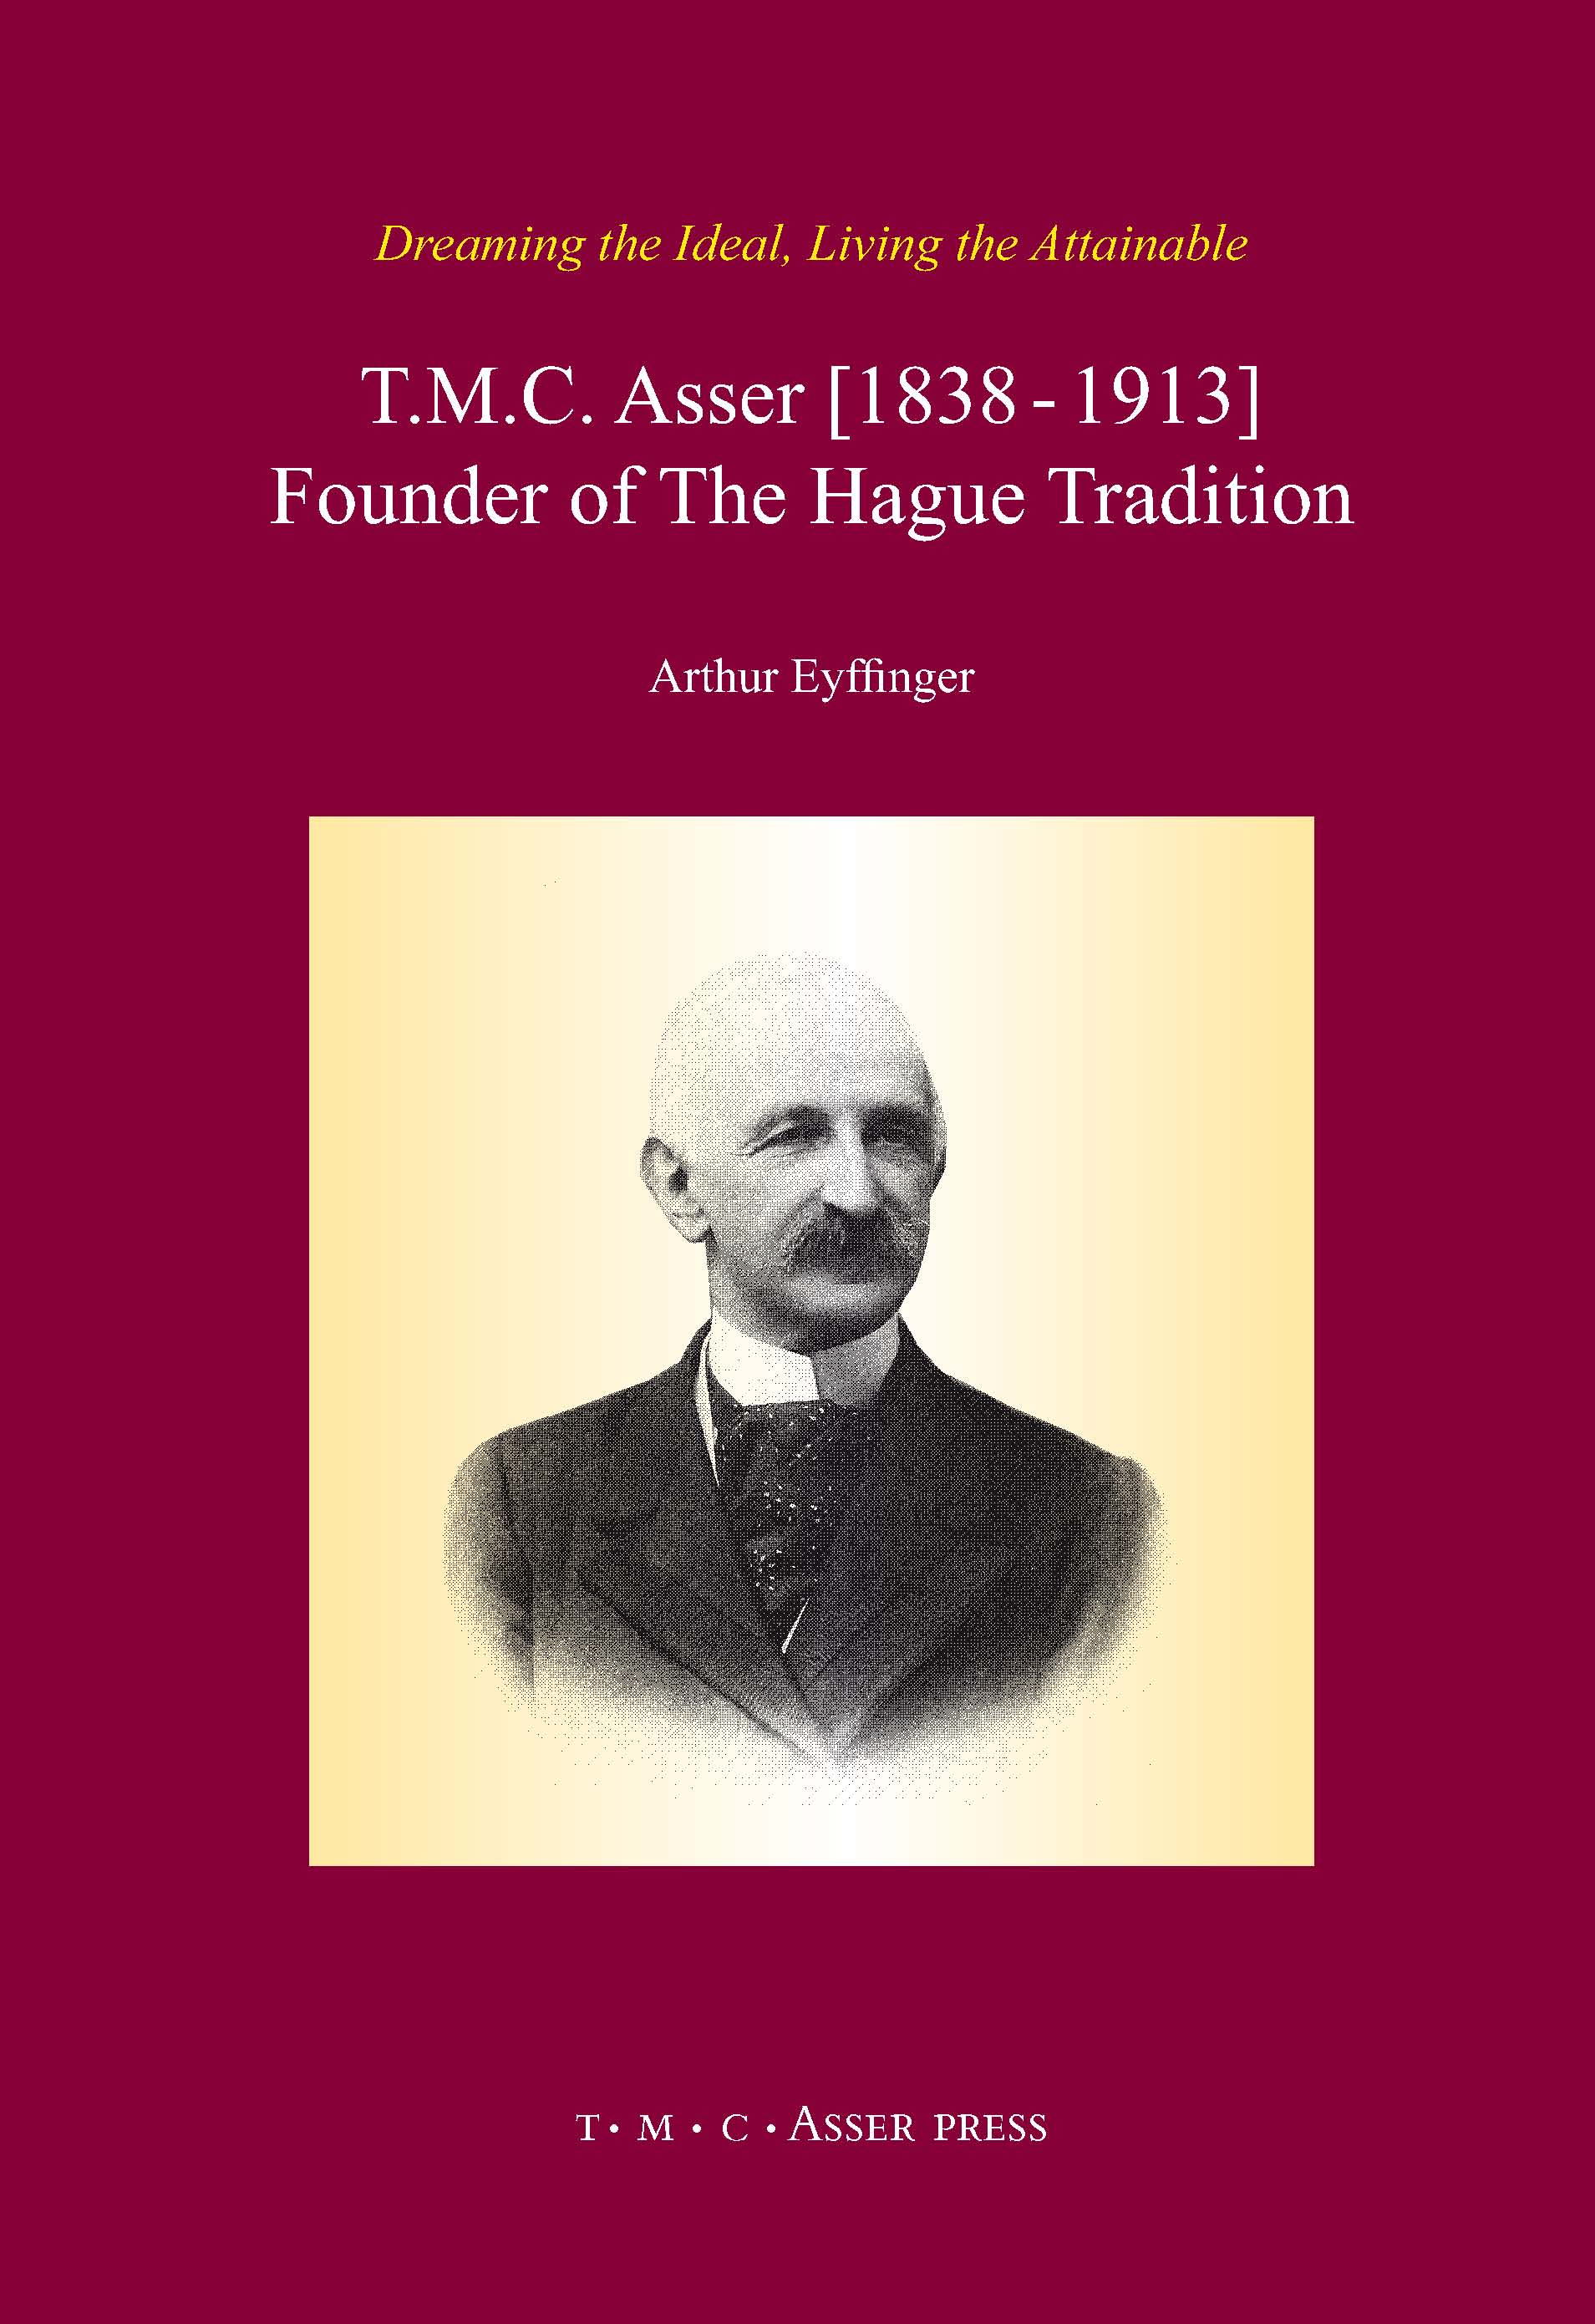 T.M.C. Asser [1838 - 1913] - Founder of The Hague Tradition